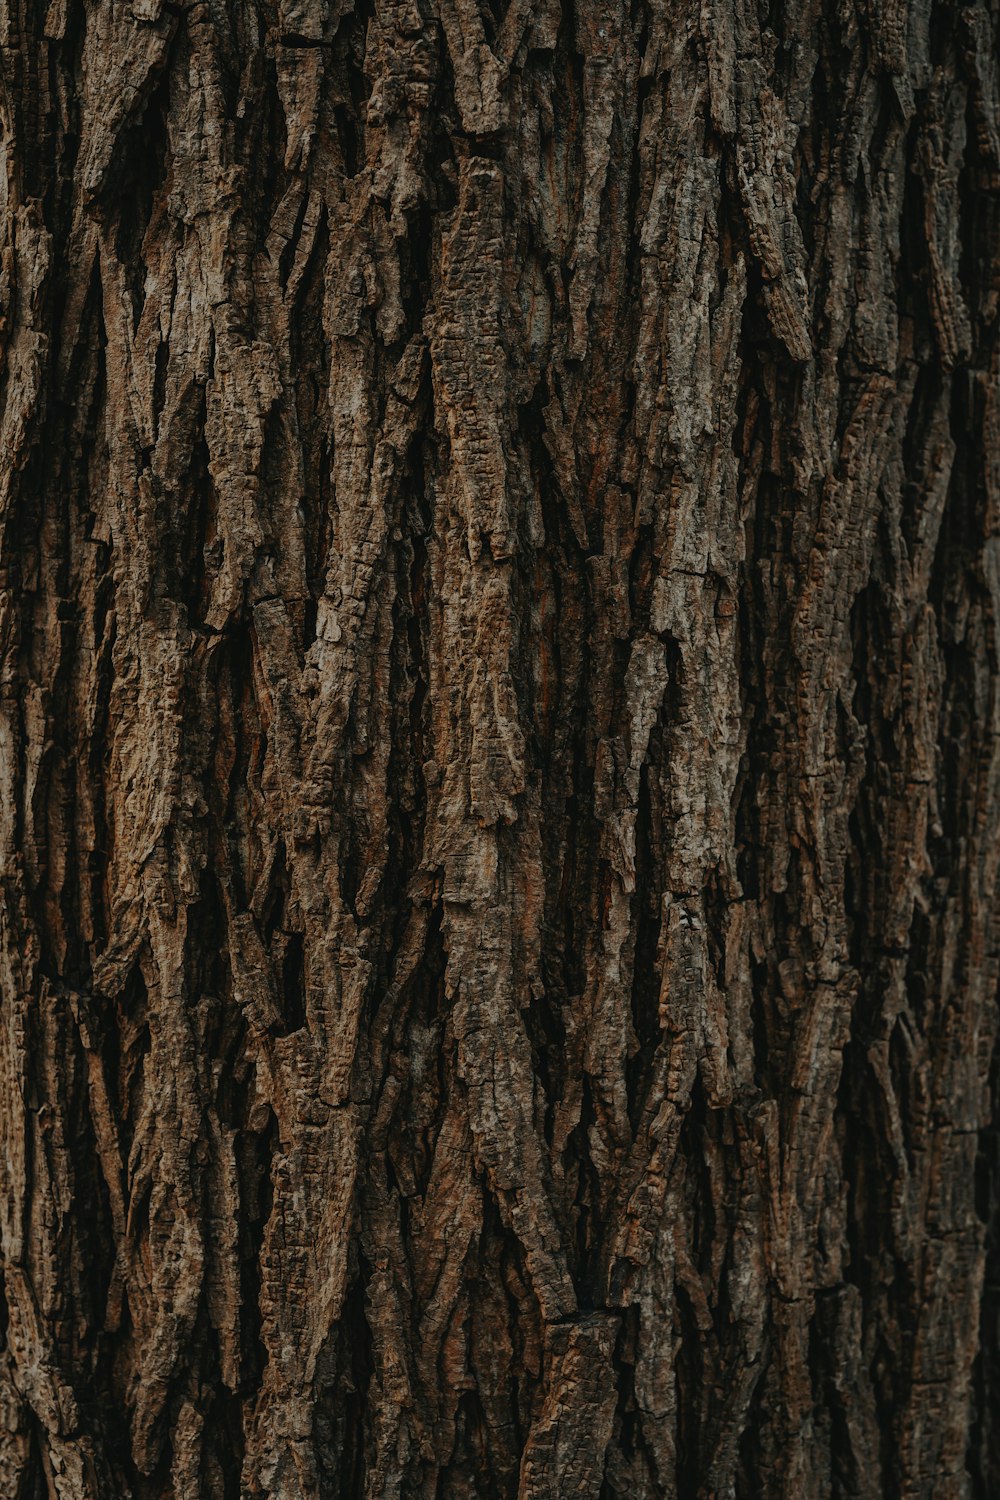 Tree Bark Texture: Background Images & Pictures